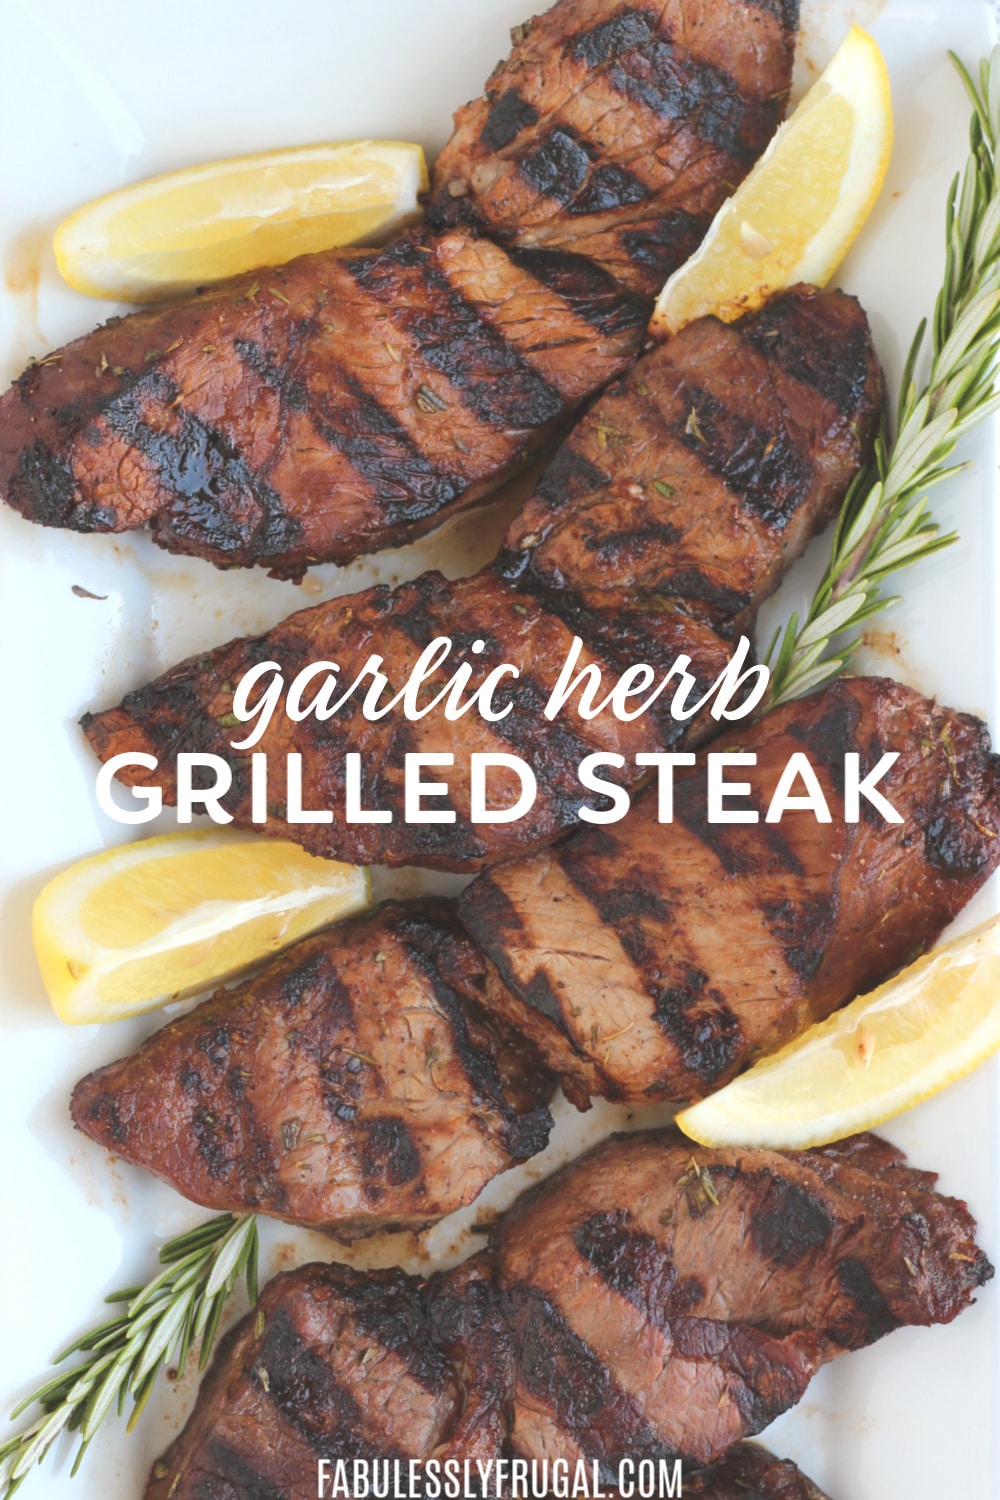 Amazing garlic herb steak tips recipe - easy and delicious